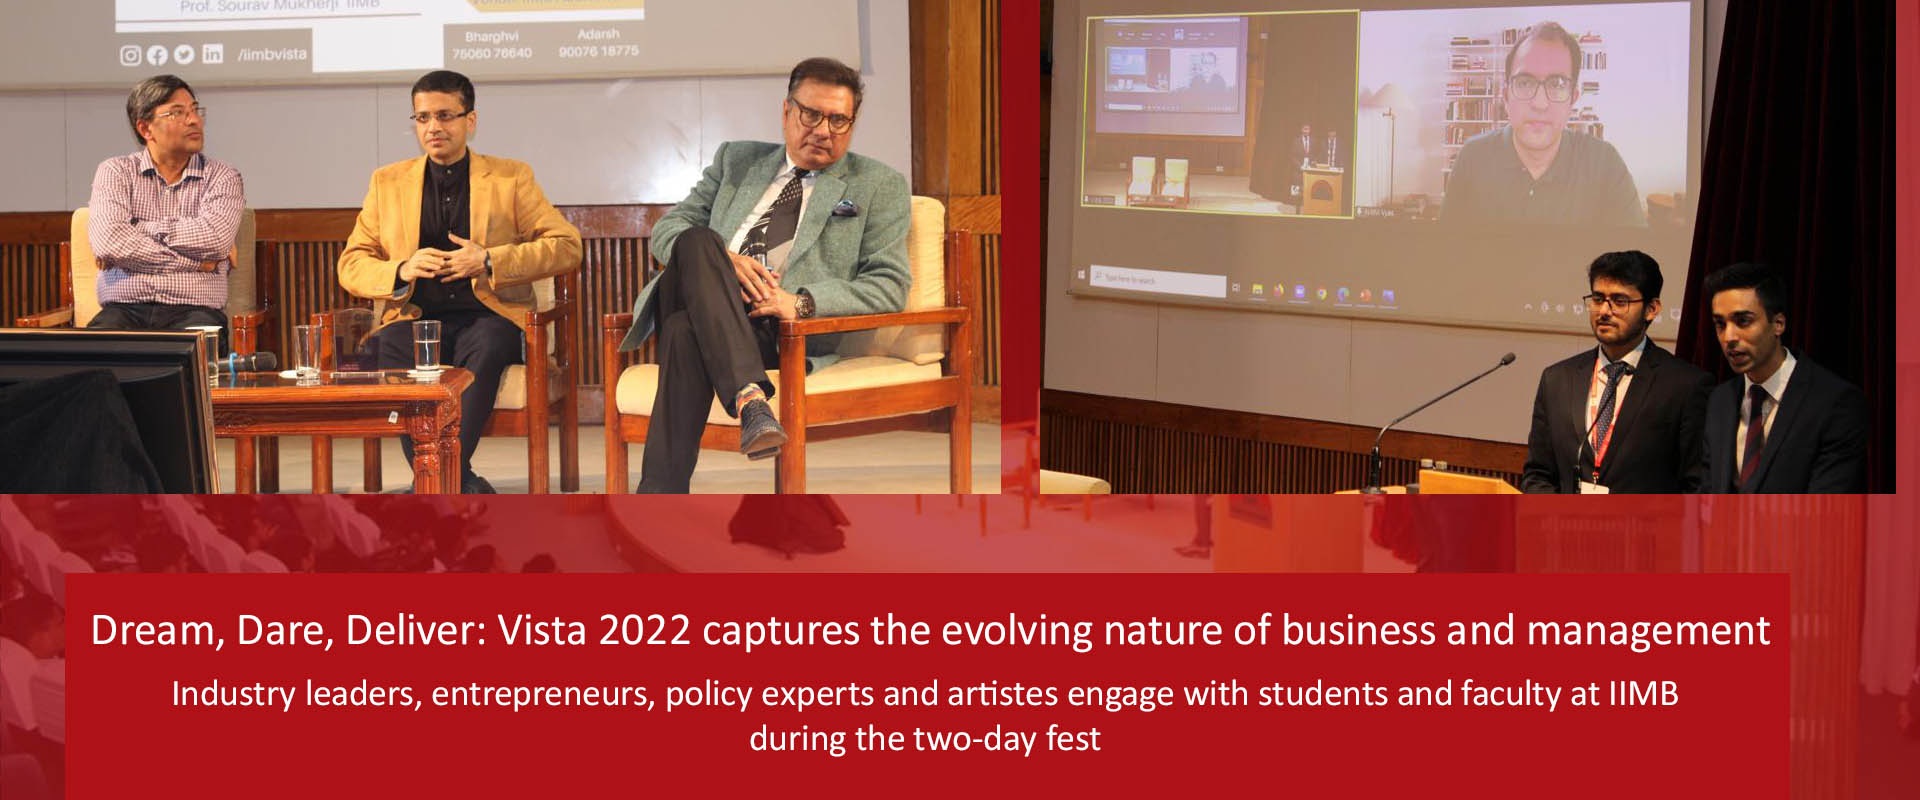 Dream, Dare, Deliver: Vista 2022 captures the evolving nature of business and management